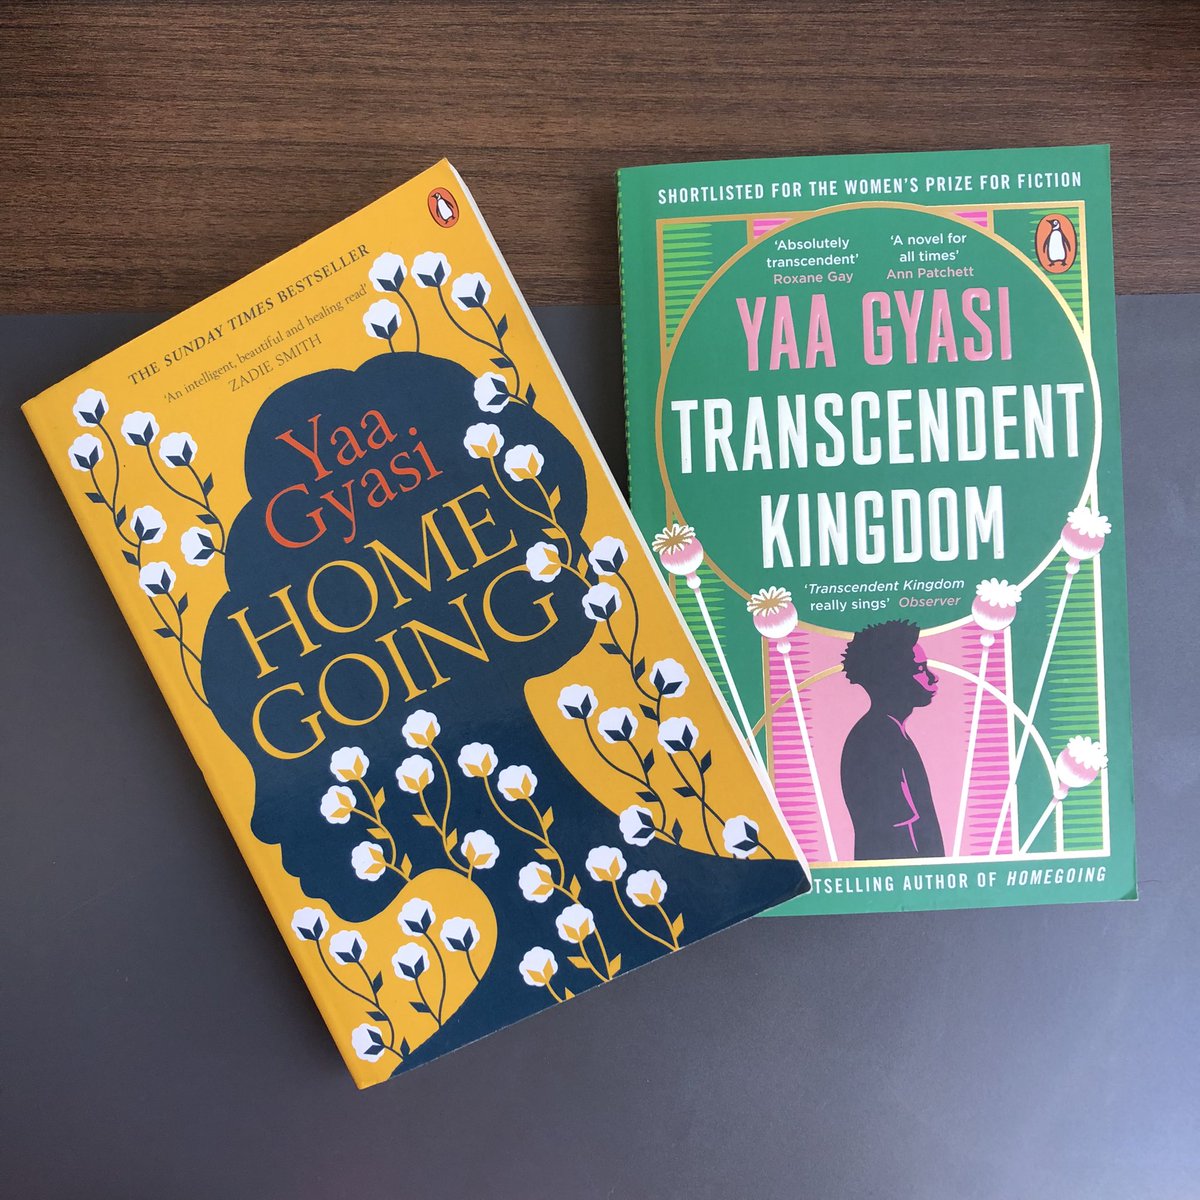 Two for Tuesday 
Today we celebrate Ghanaian novelist Yaa Gyasi.
She’s the author of the critically acclaimed Homegoing and Transcendent Kingdom. 

Have you read both books? 

#yaagyasi #homegoing #transcendentkingdom #africanfiction #lolwebookske #kisumubookstore #kisumu